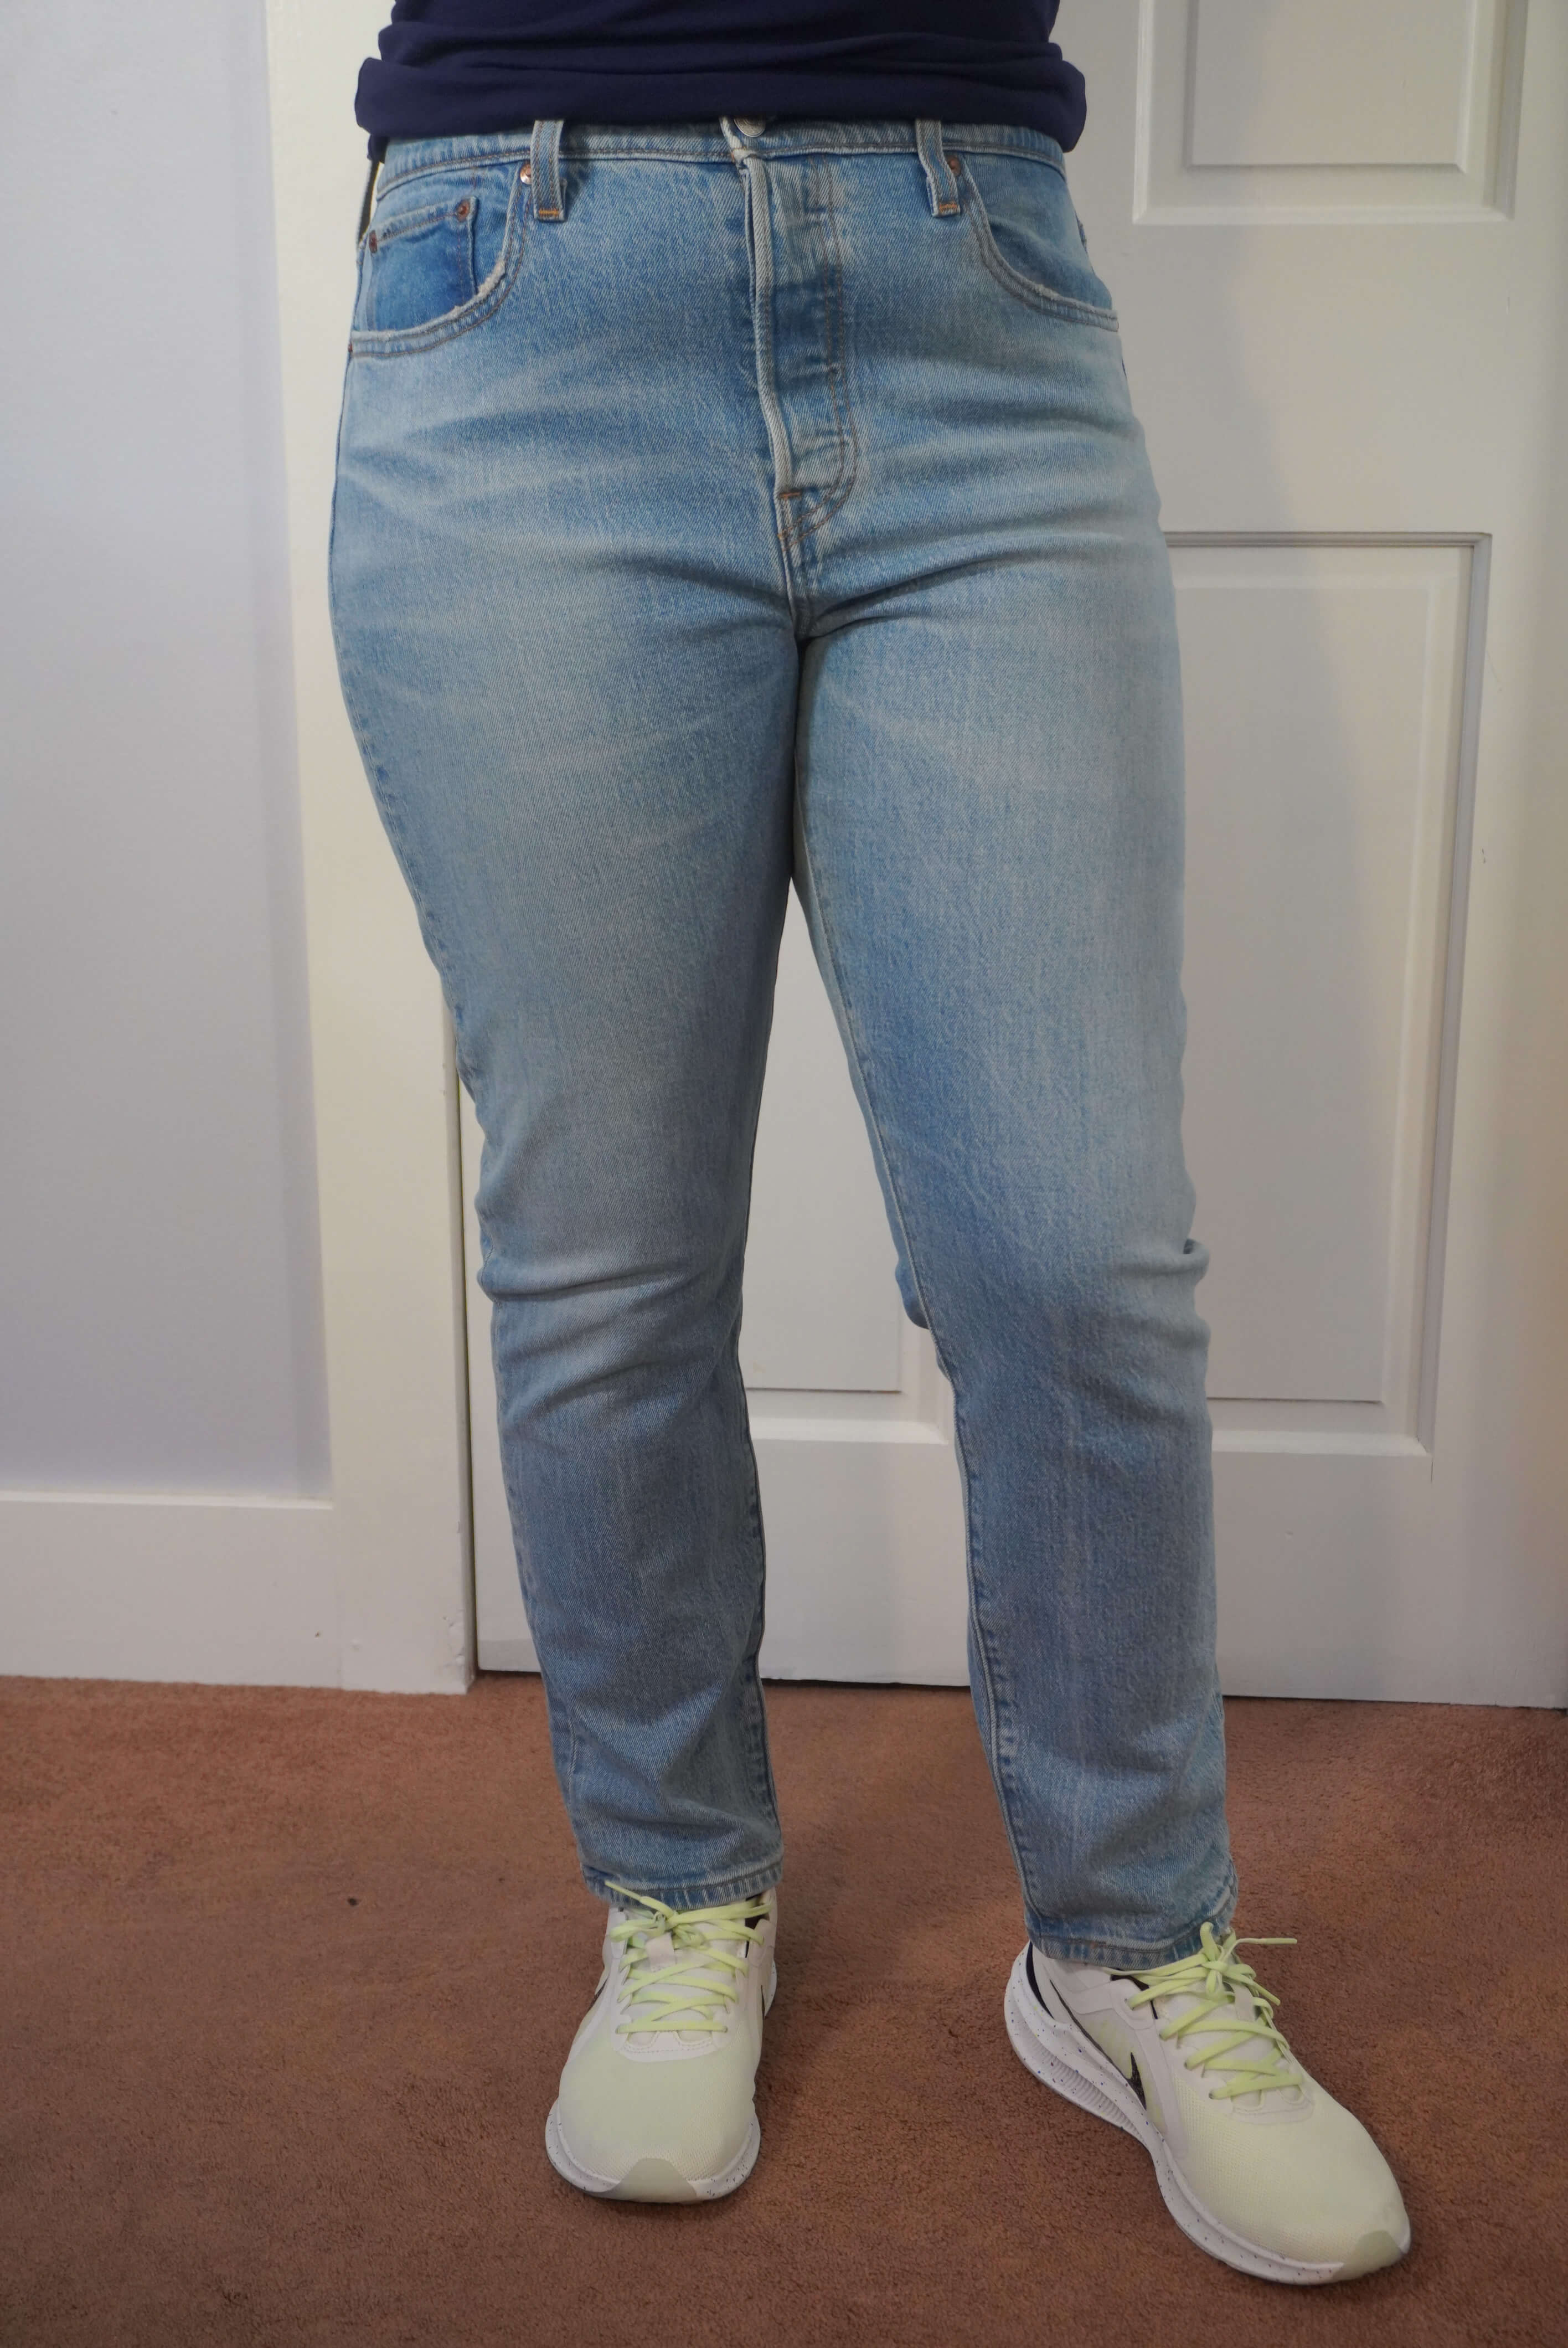 This image shows a front view of the author wearing a pair of plain Levi's Wedgie jeans in a light blue wash. This shows the relaxed fit in the front.